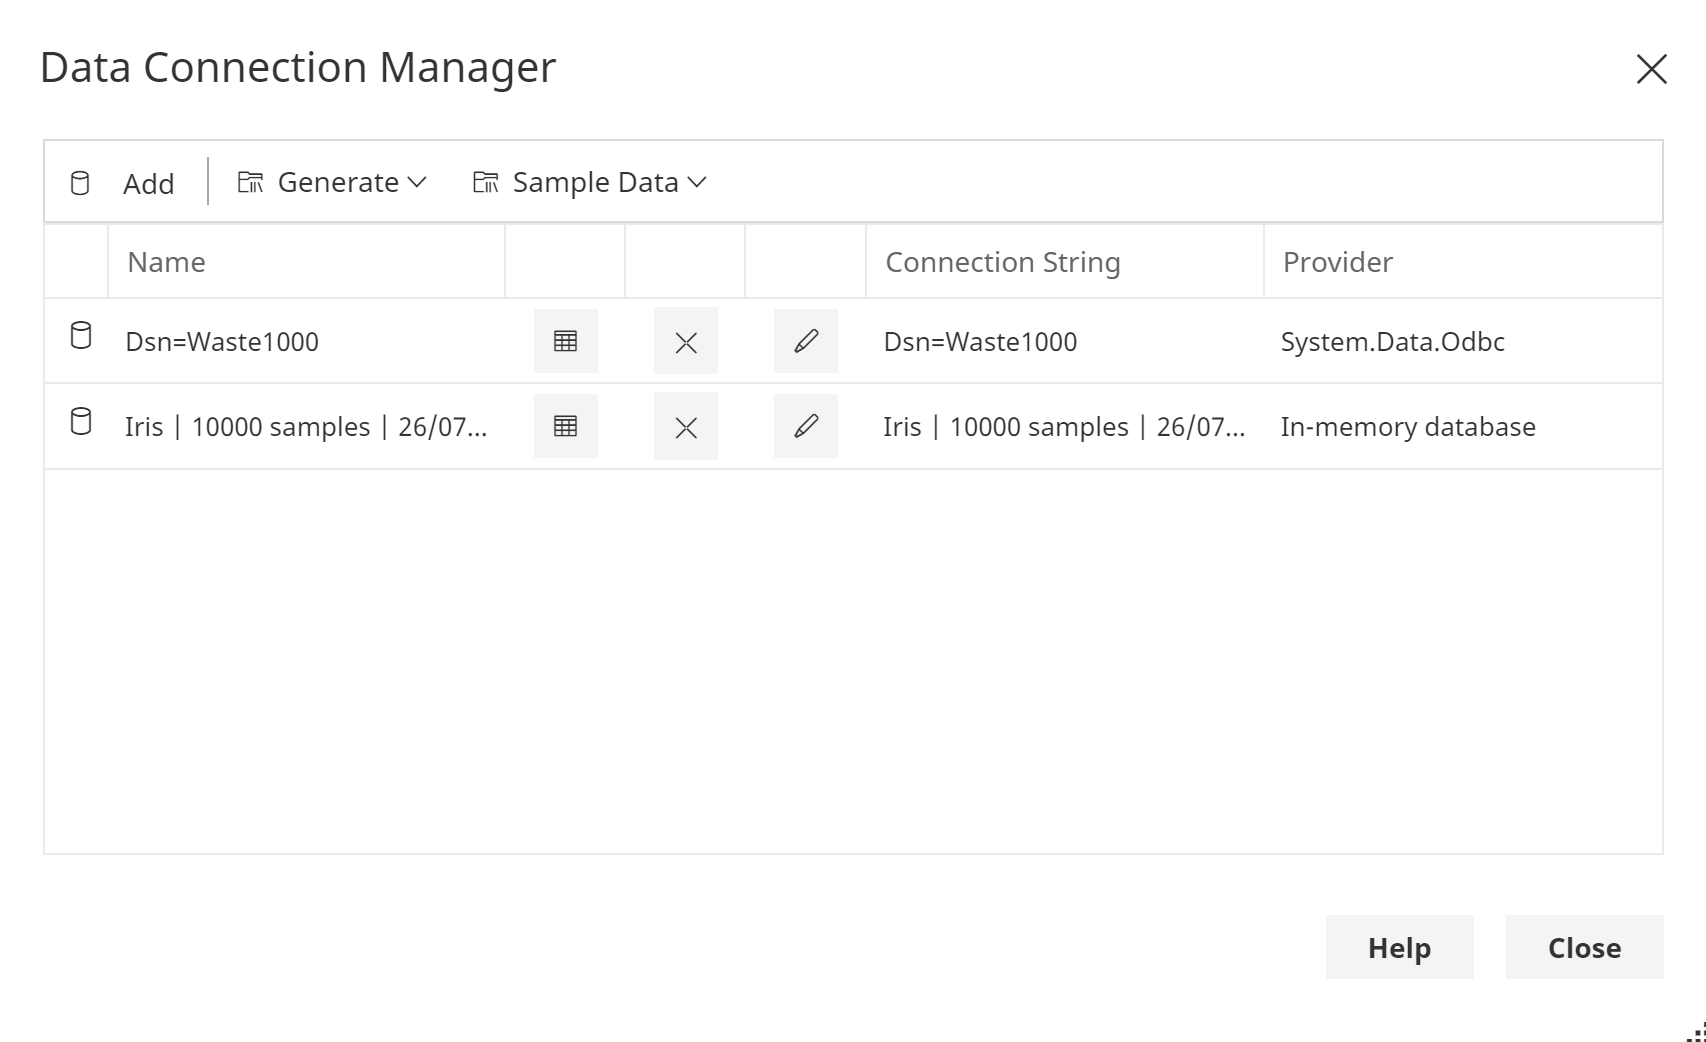 Data connection manager